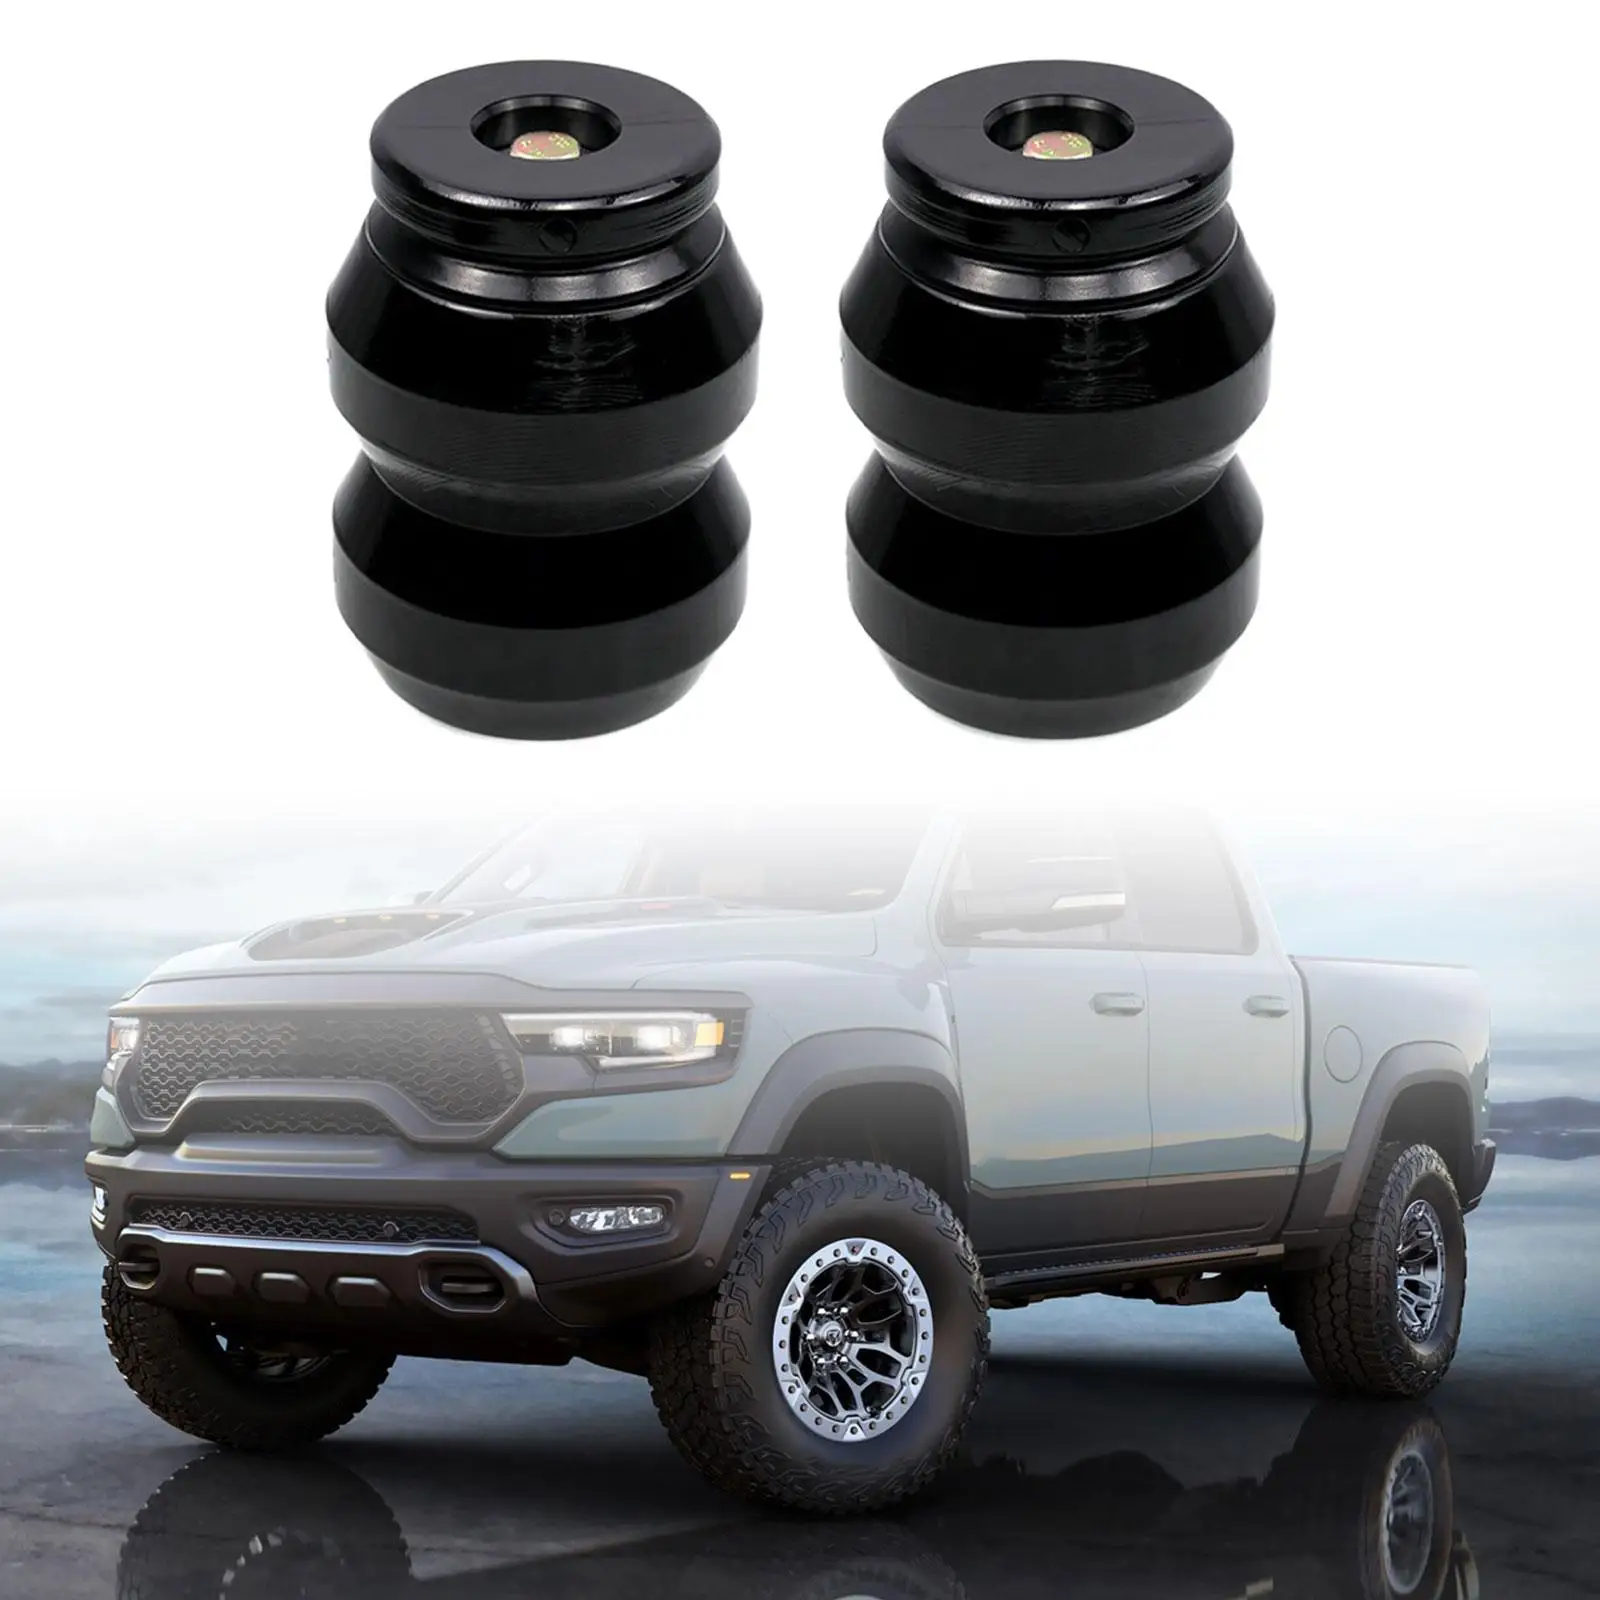 2 Pieces Suspension Enhancement System DR1500dq Rubber High Quality Directly Replace for Dodge RAM 1500 2WD 4WD Accessory